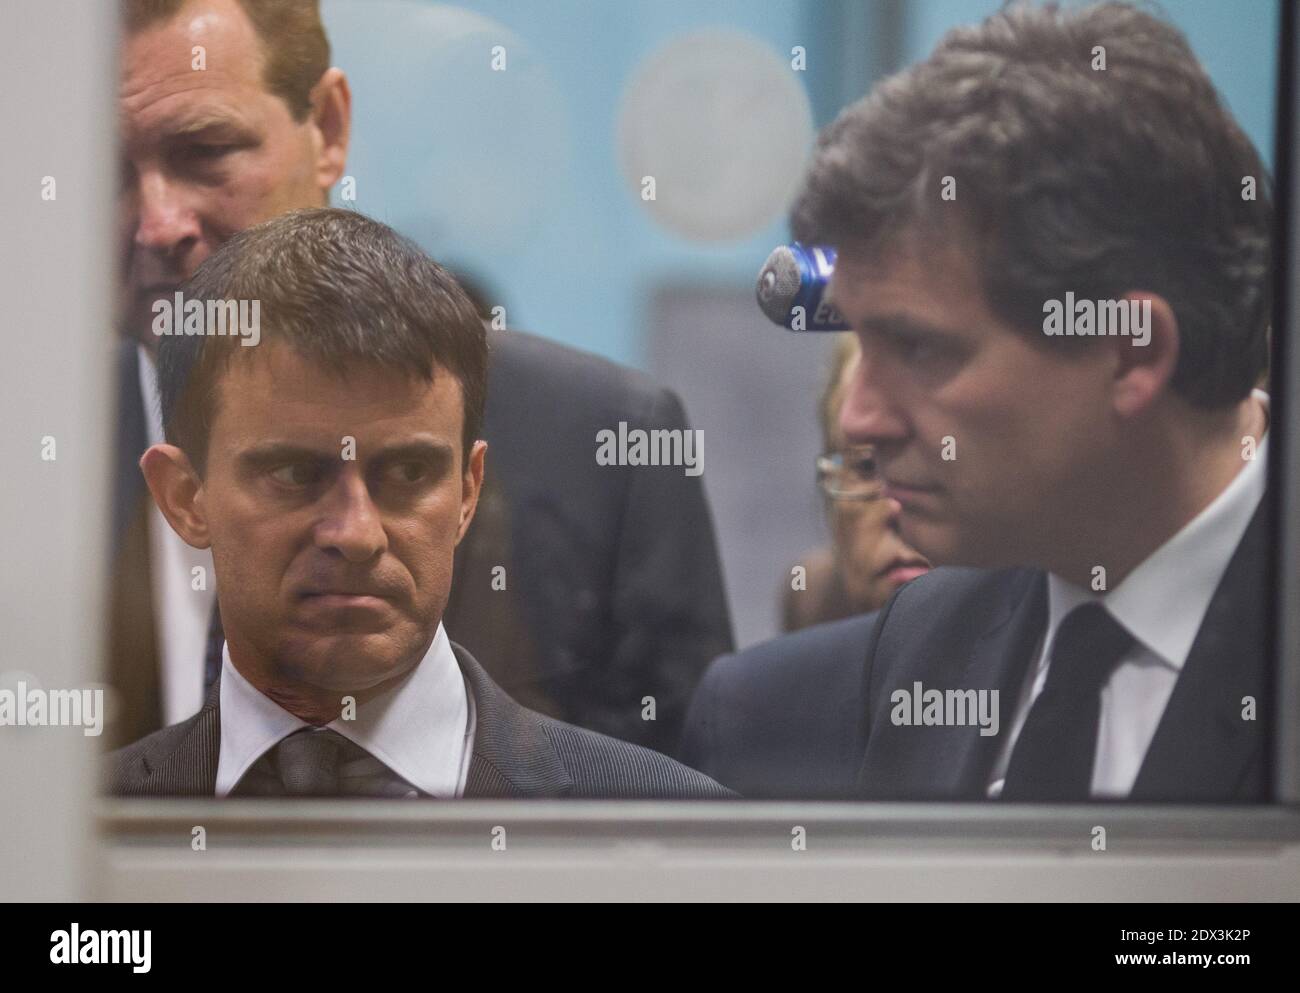 French PM Manuel Valls has submitted the government's resignation to President Francois Hollande and has been asked to form a new cabinet. The government was badly shaken on Sunday by criticism over its handling of the economy by economy minister Arnaud Montebourg. File photo : Arnaud Montebourg and Prime mnnister Manuel Valls visits Straubli plant in Faverges, France wifh the Chairman françois morisse and former nationl assembly president Bernard Accoyer on May 12, 2014. Photos by Vincent Dargent/ABACAPRESS.COM Stock Photo